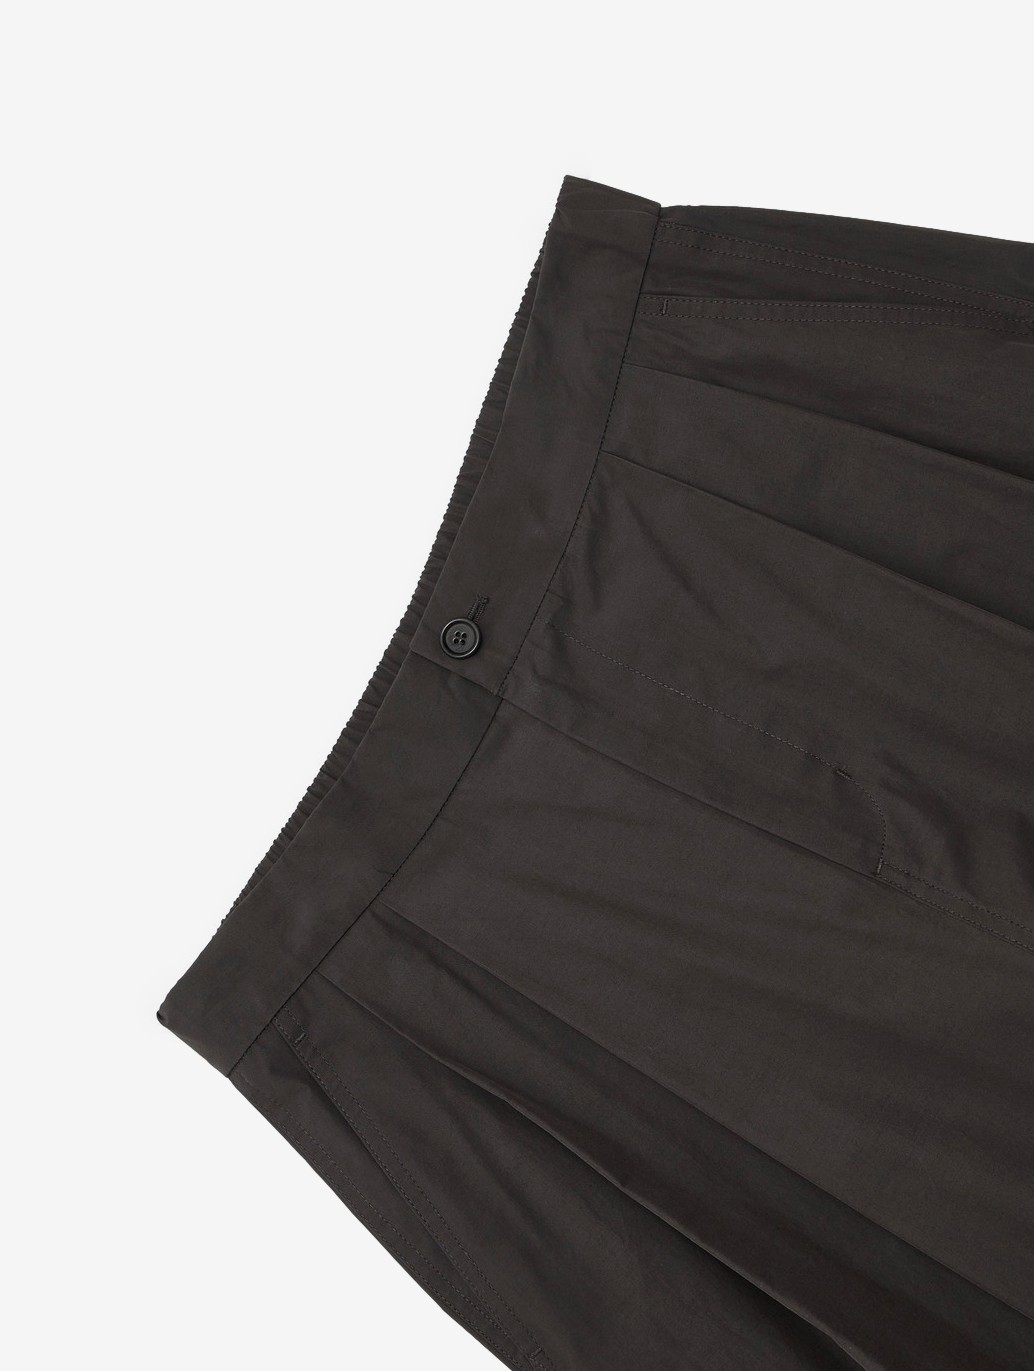 Amomento Mens Two Tuck Wide Pants in Charcoal